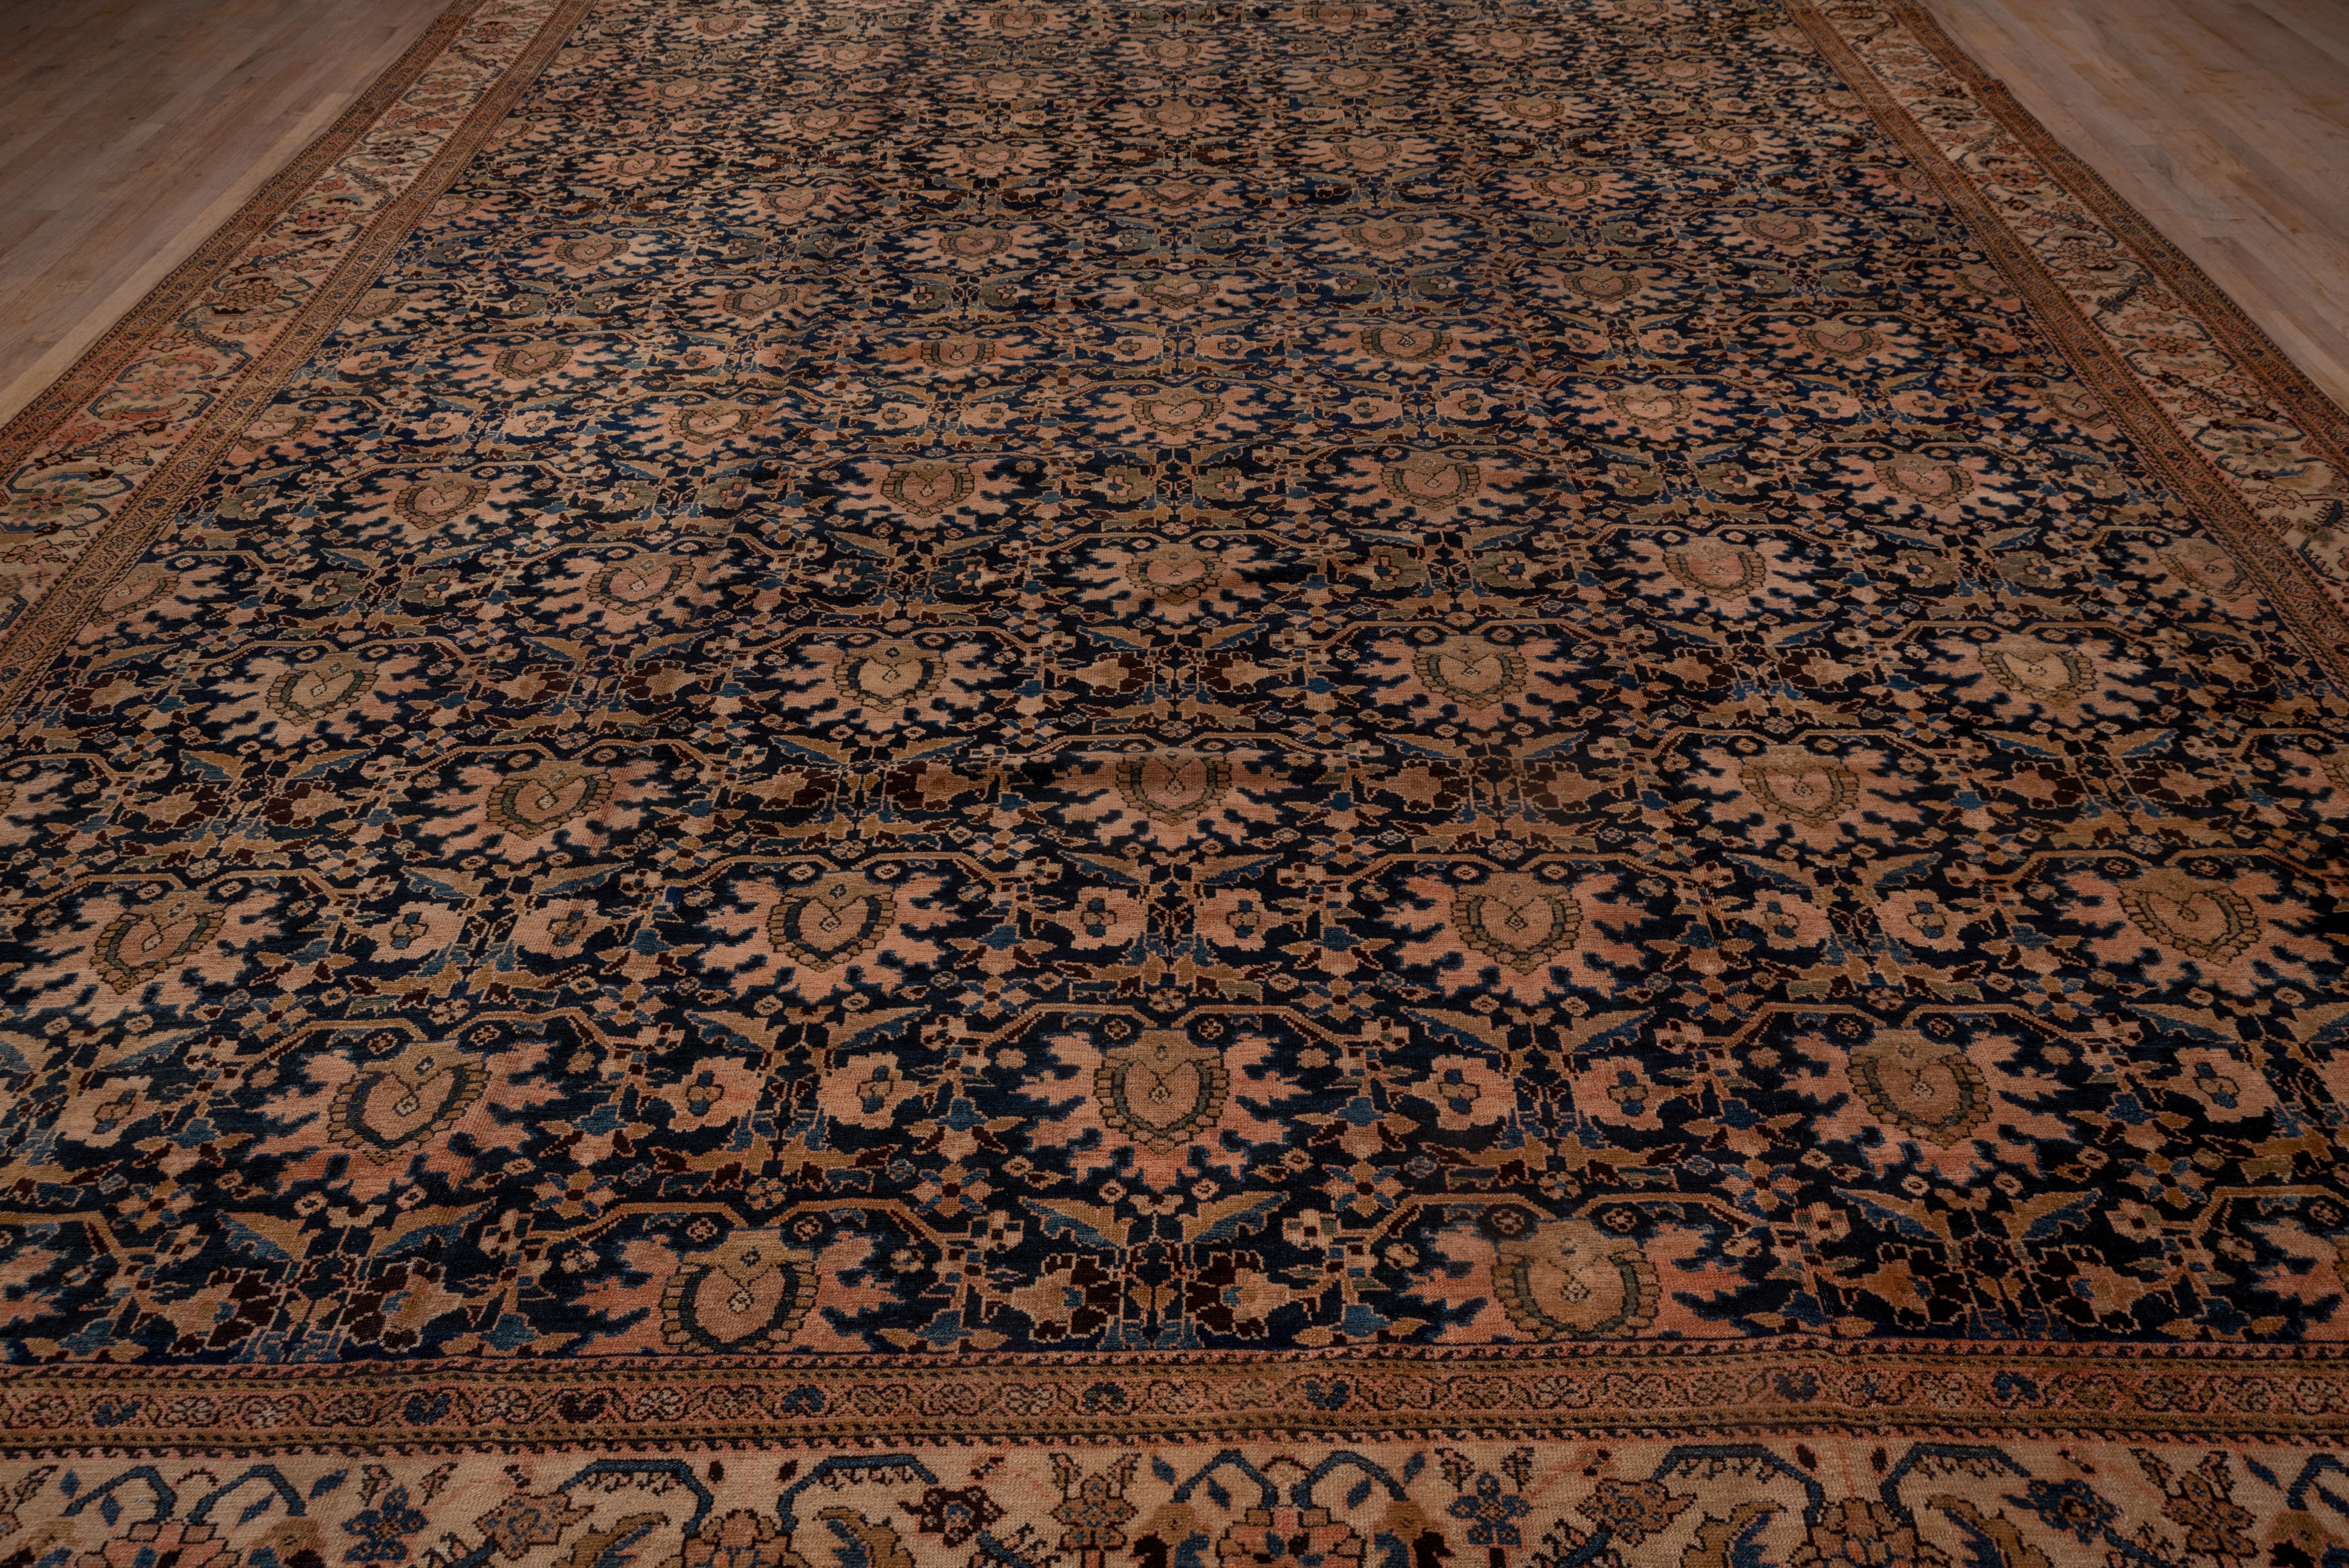 The charcoal field is covered by a one-way, offset ragged palmette pattern accented in straw, rust, dark brown and buff. The sandy straw main border of this extra-large west Persian town car pet shows a version of the tangerine flower design, but